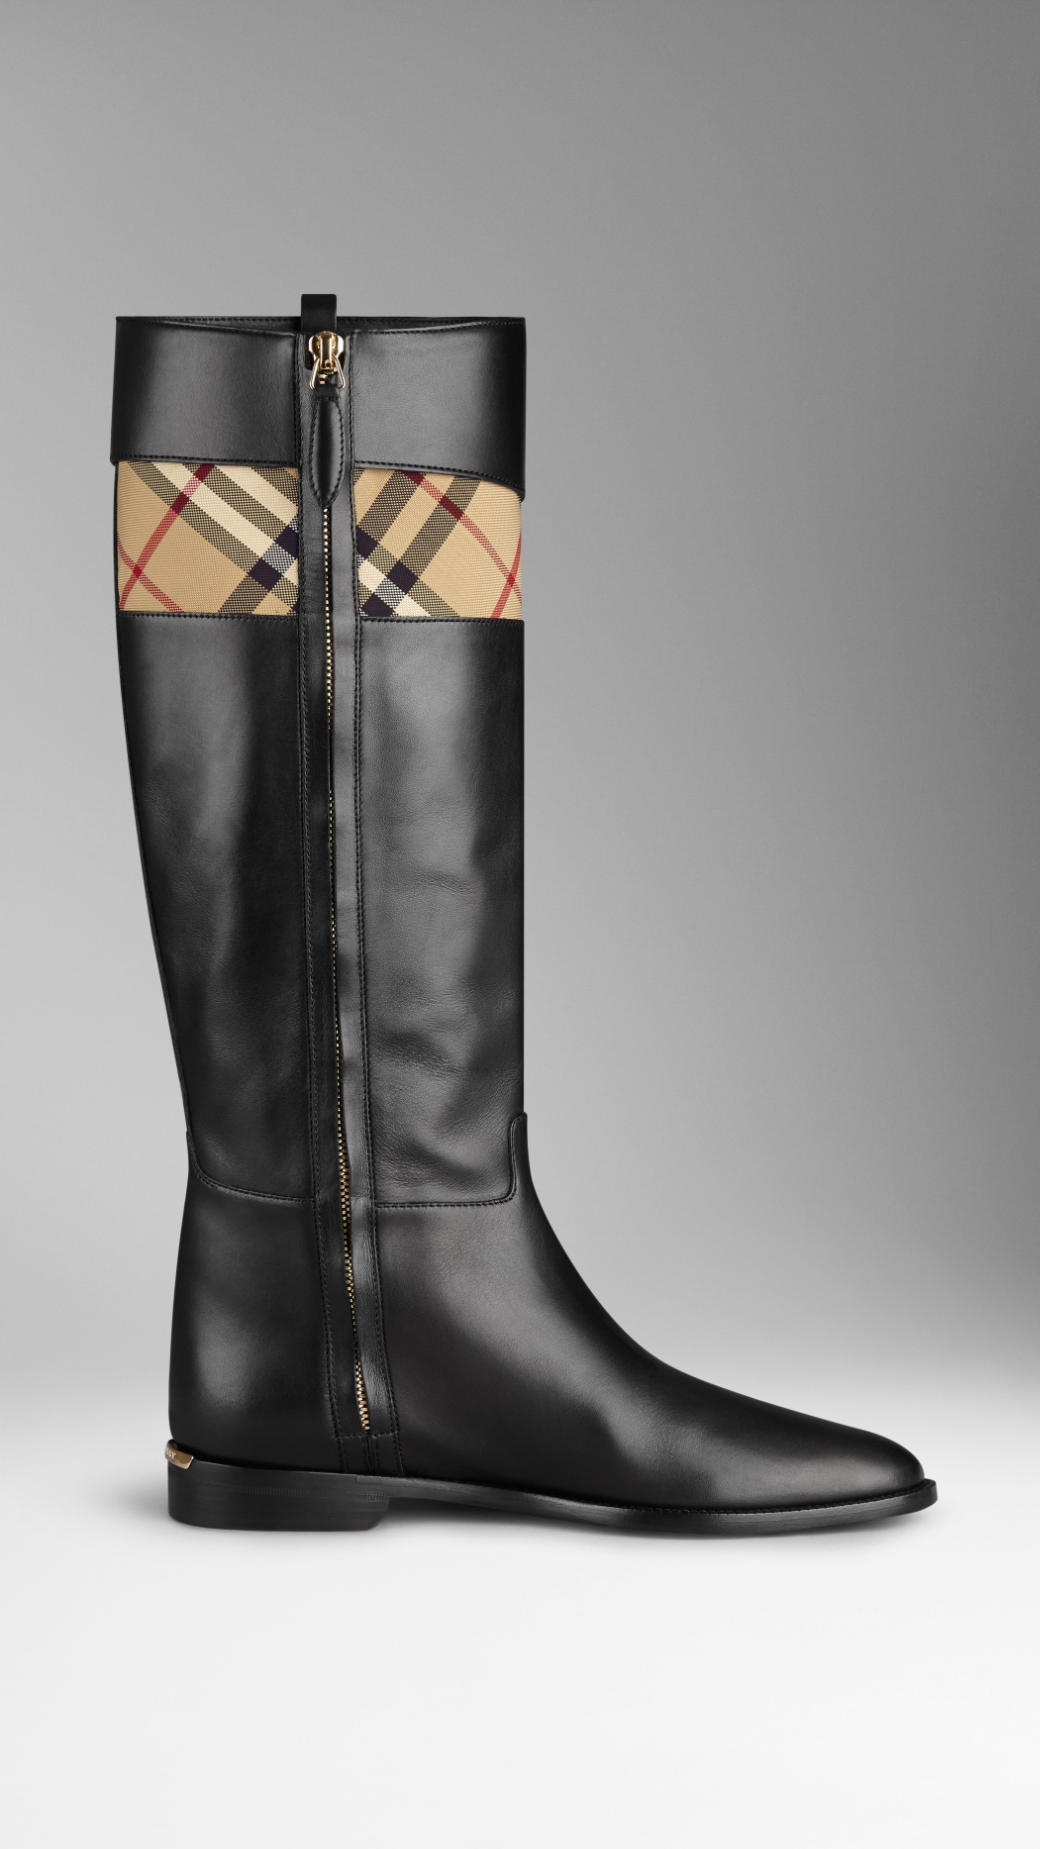 Lyst - Burberry Horseferry Check Detail Riding Boots in Black